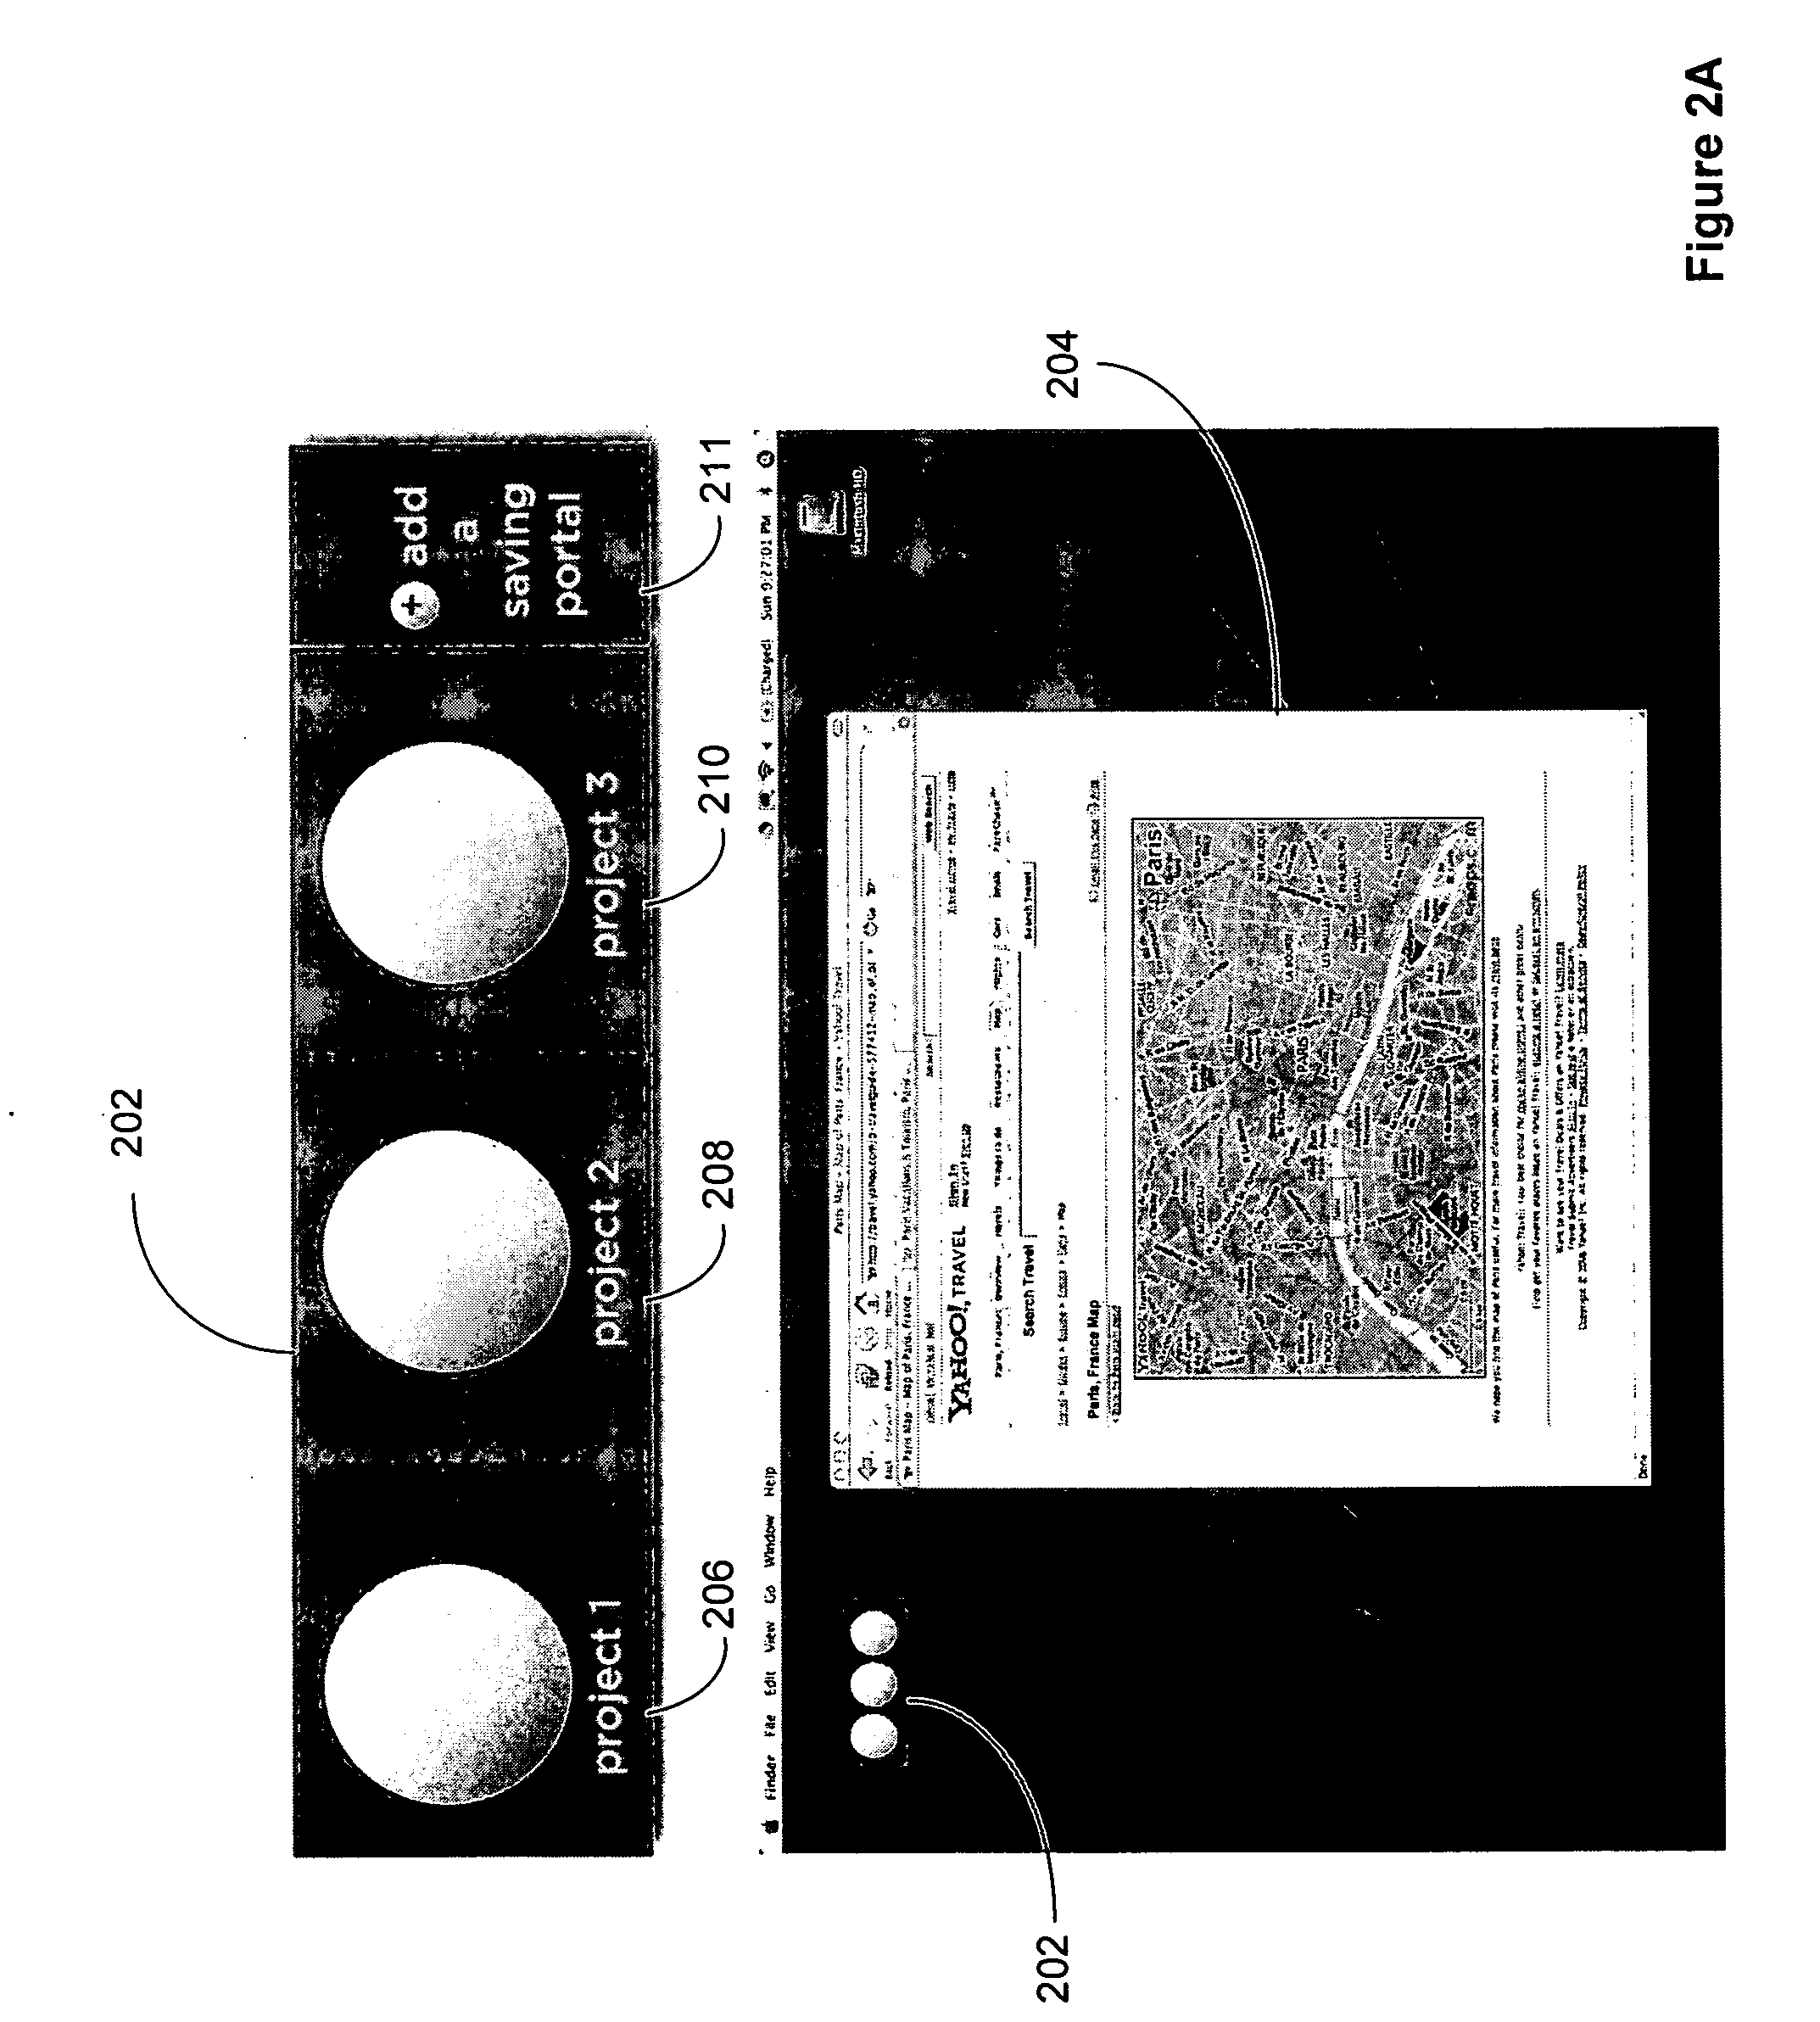 Method and system for presenting information with multiple views